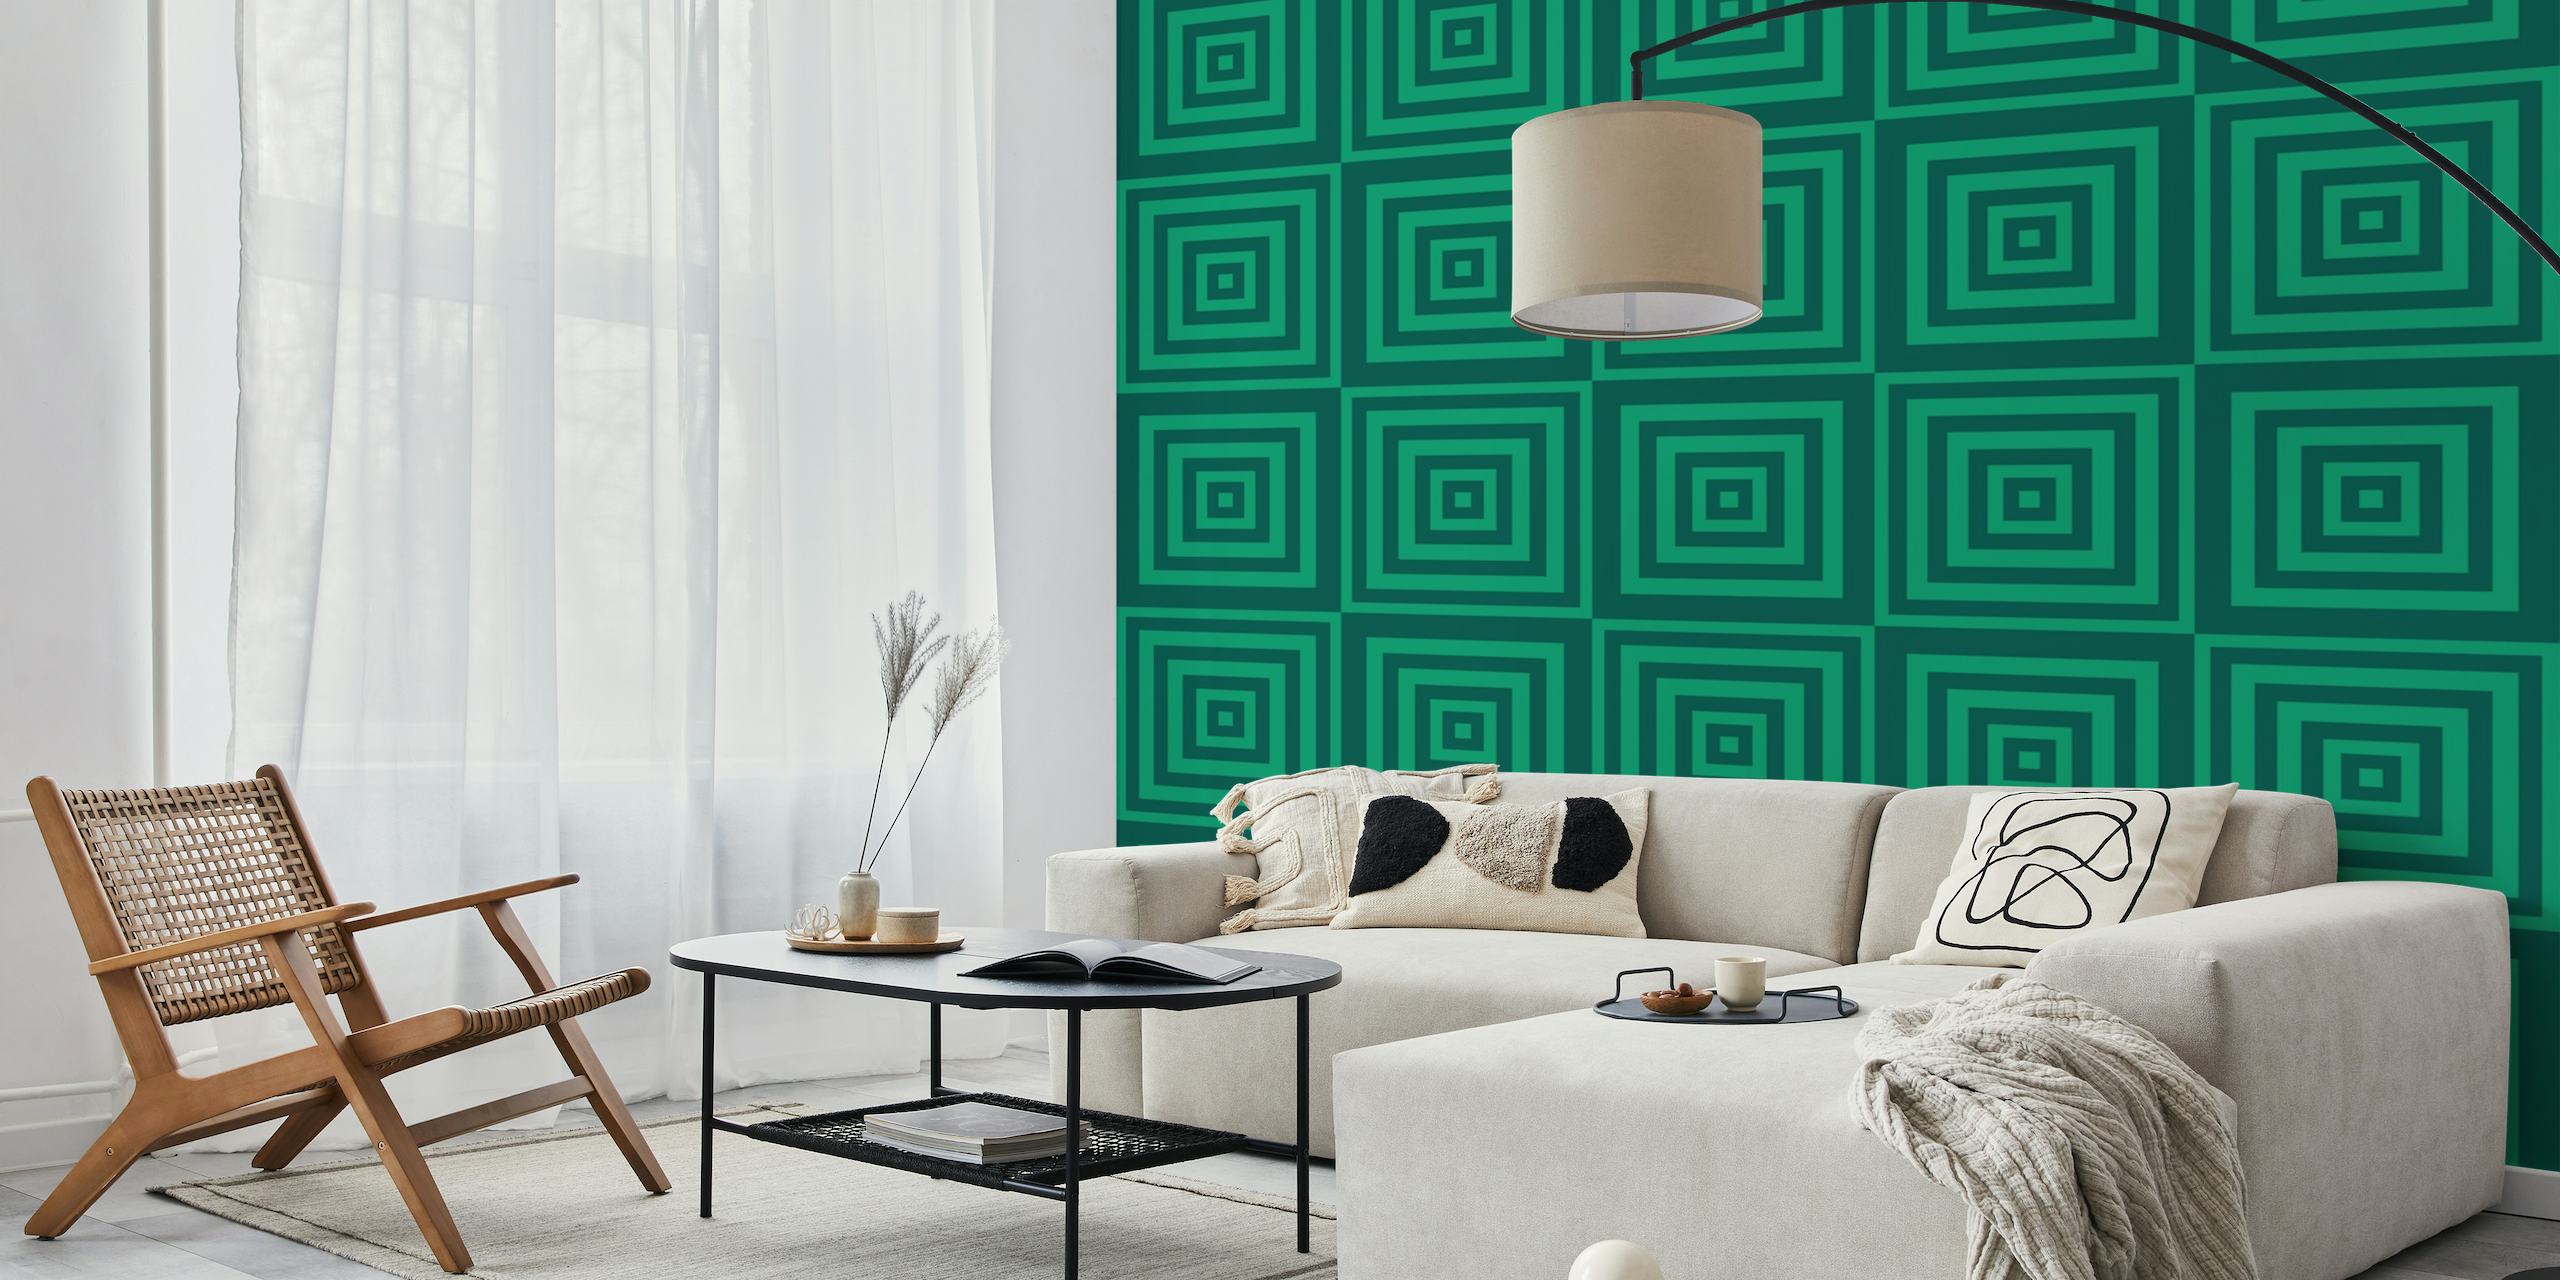 Green abstract geometric square pattern wallpaper